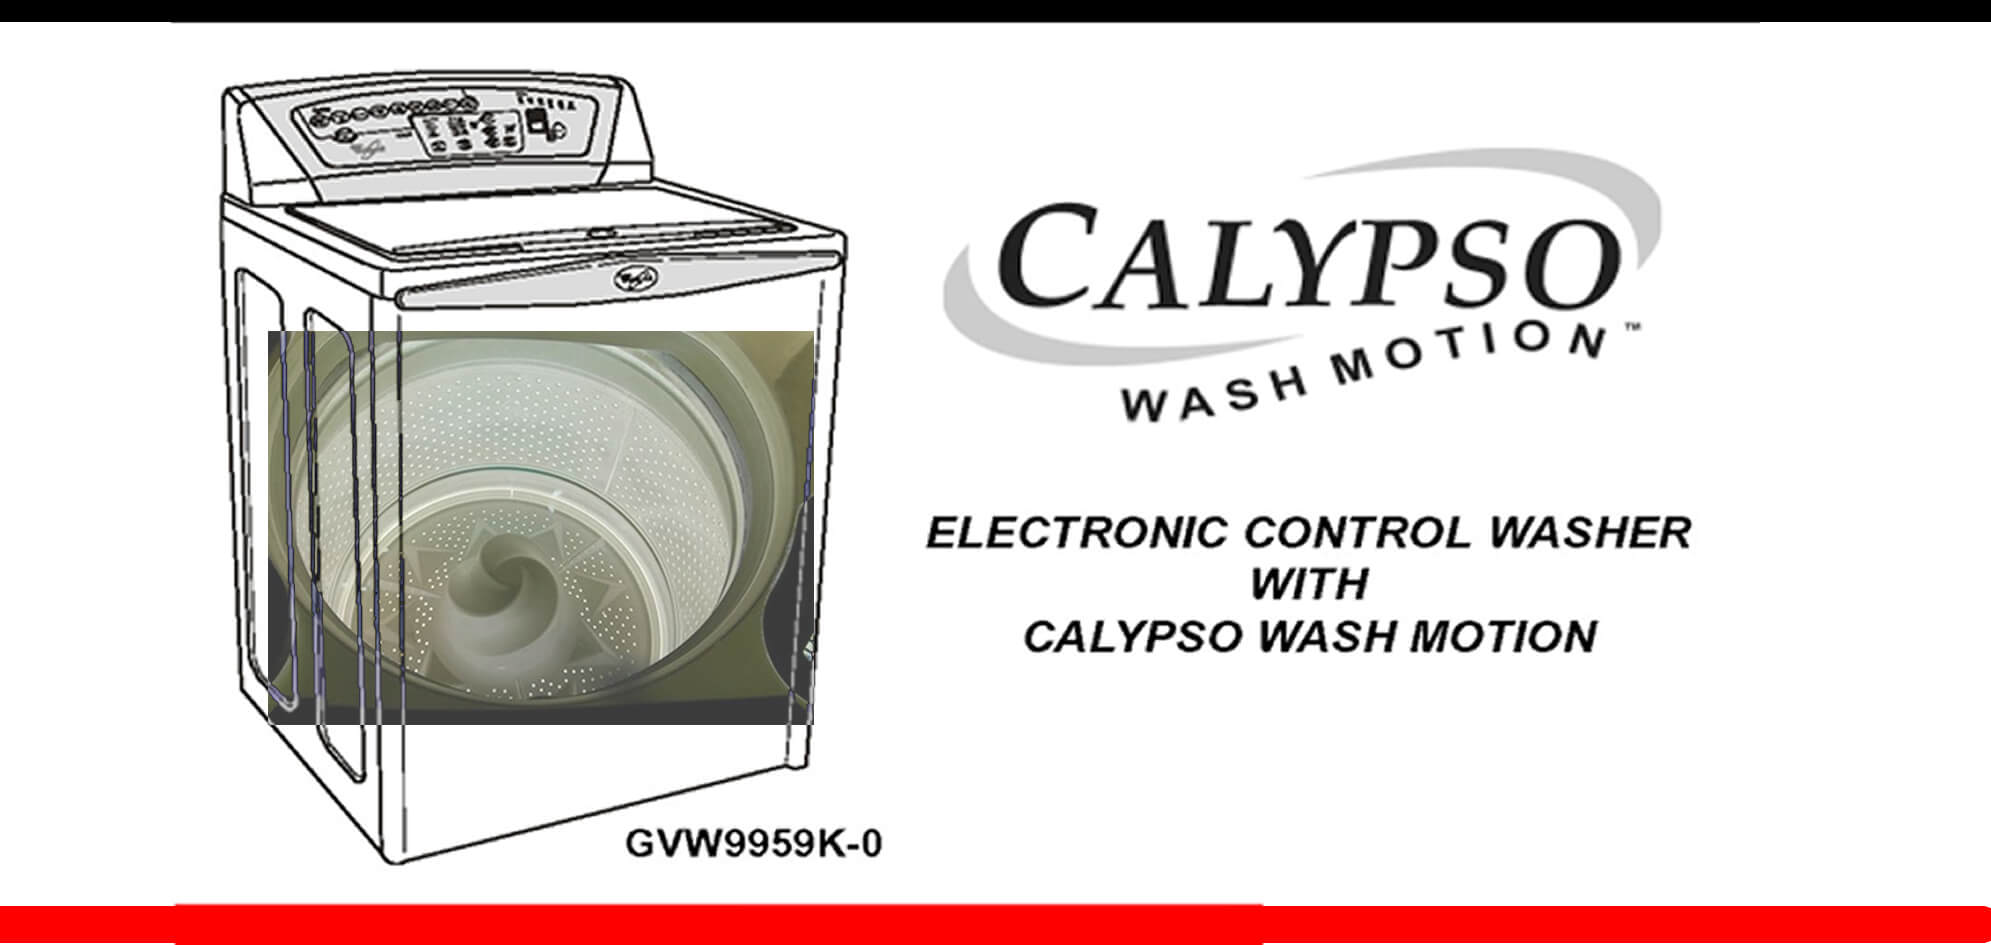 What are some Calypso washer error codes?